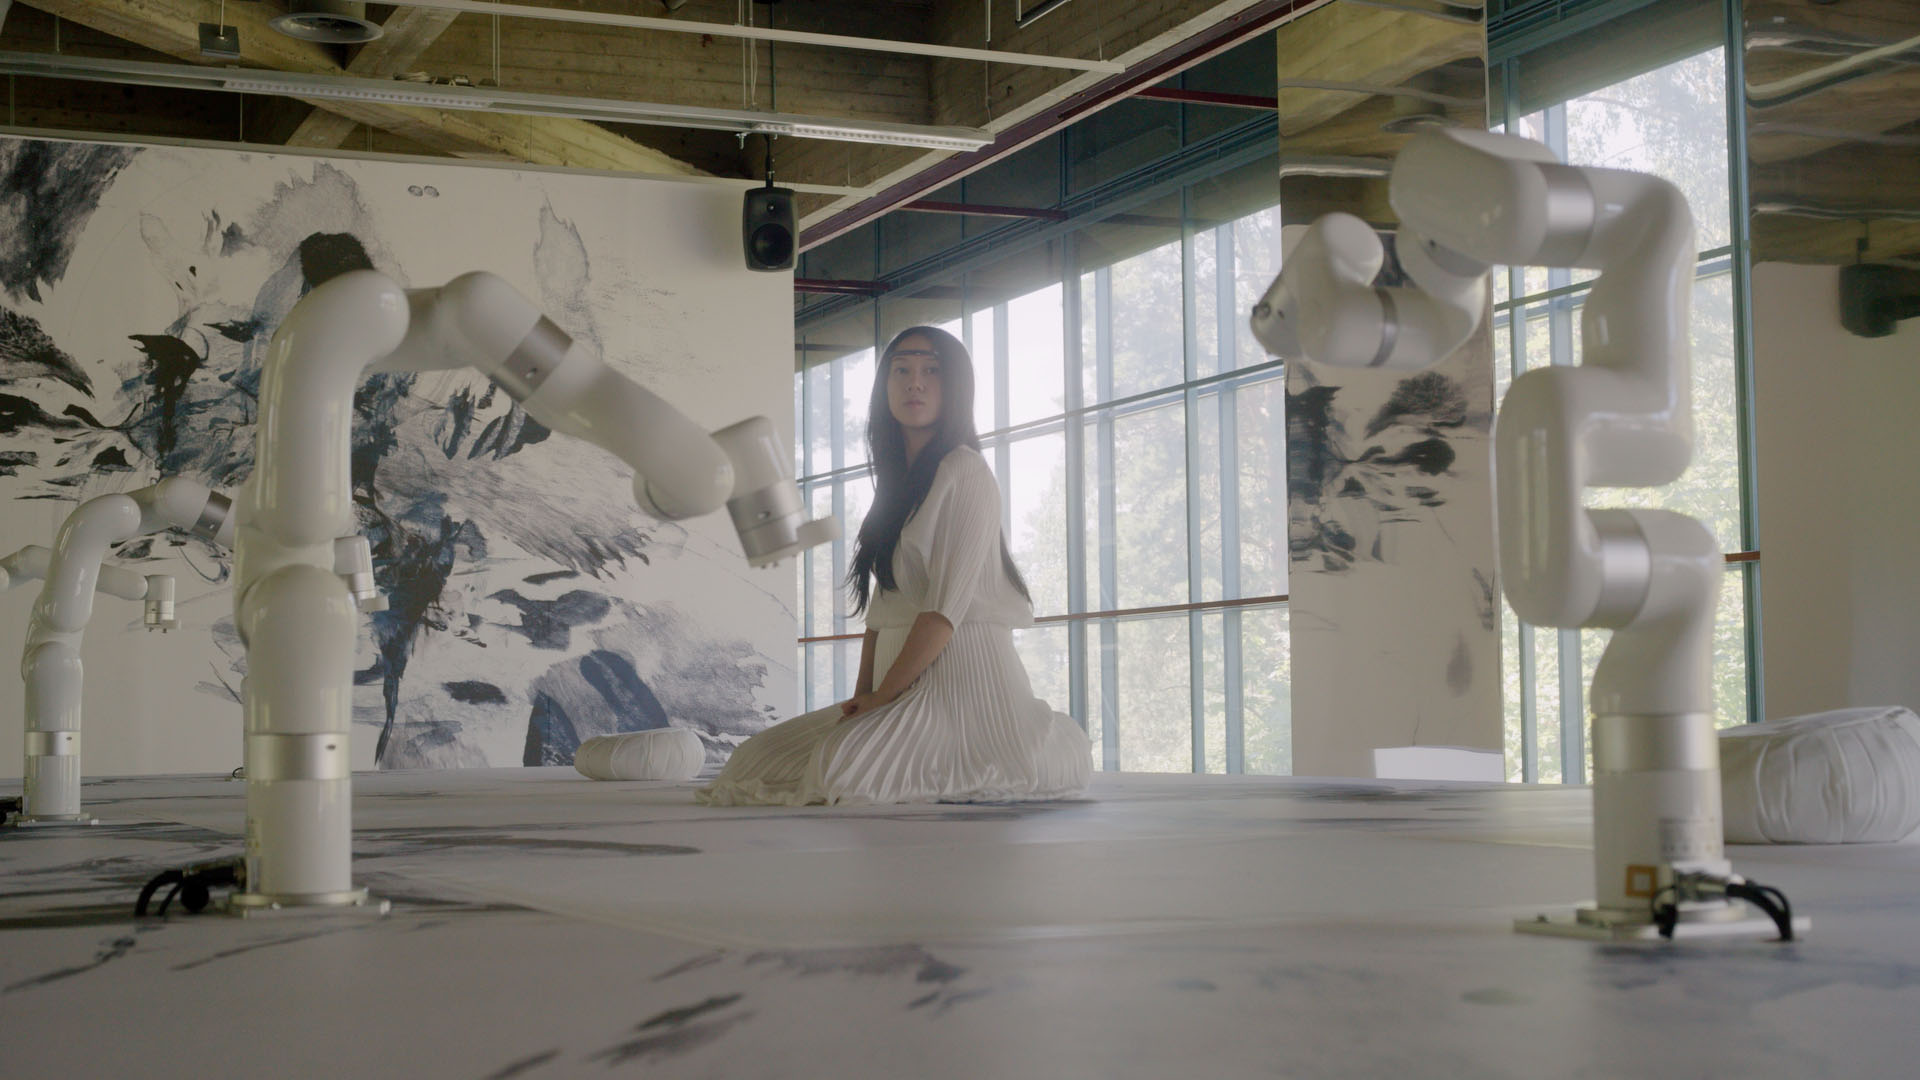 A photograph of a woman sitting on the ground, with some kind of electronic device around her head, surrounded by white robots and abstract drawings on the walls and floor